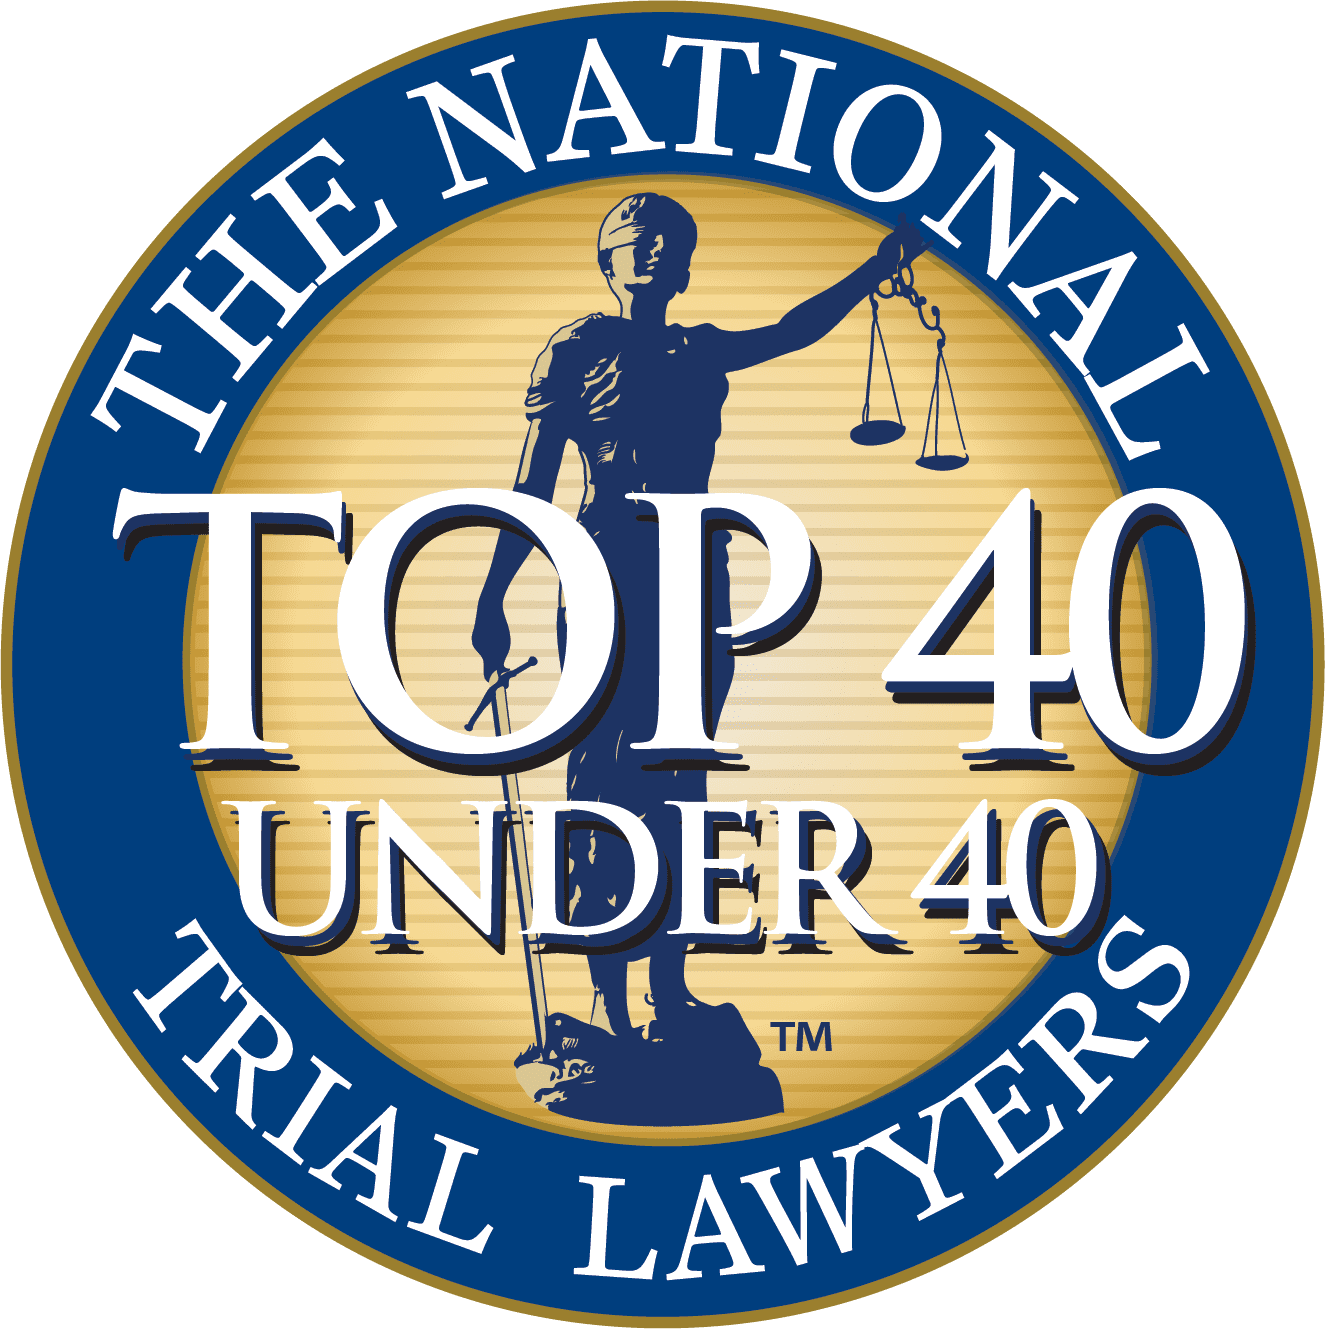 National Trial Lawyers - Top 40 Under 40